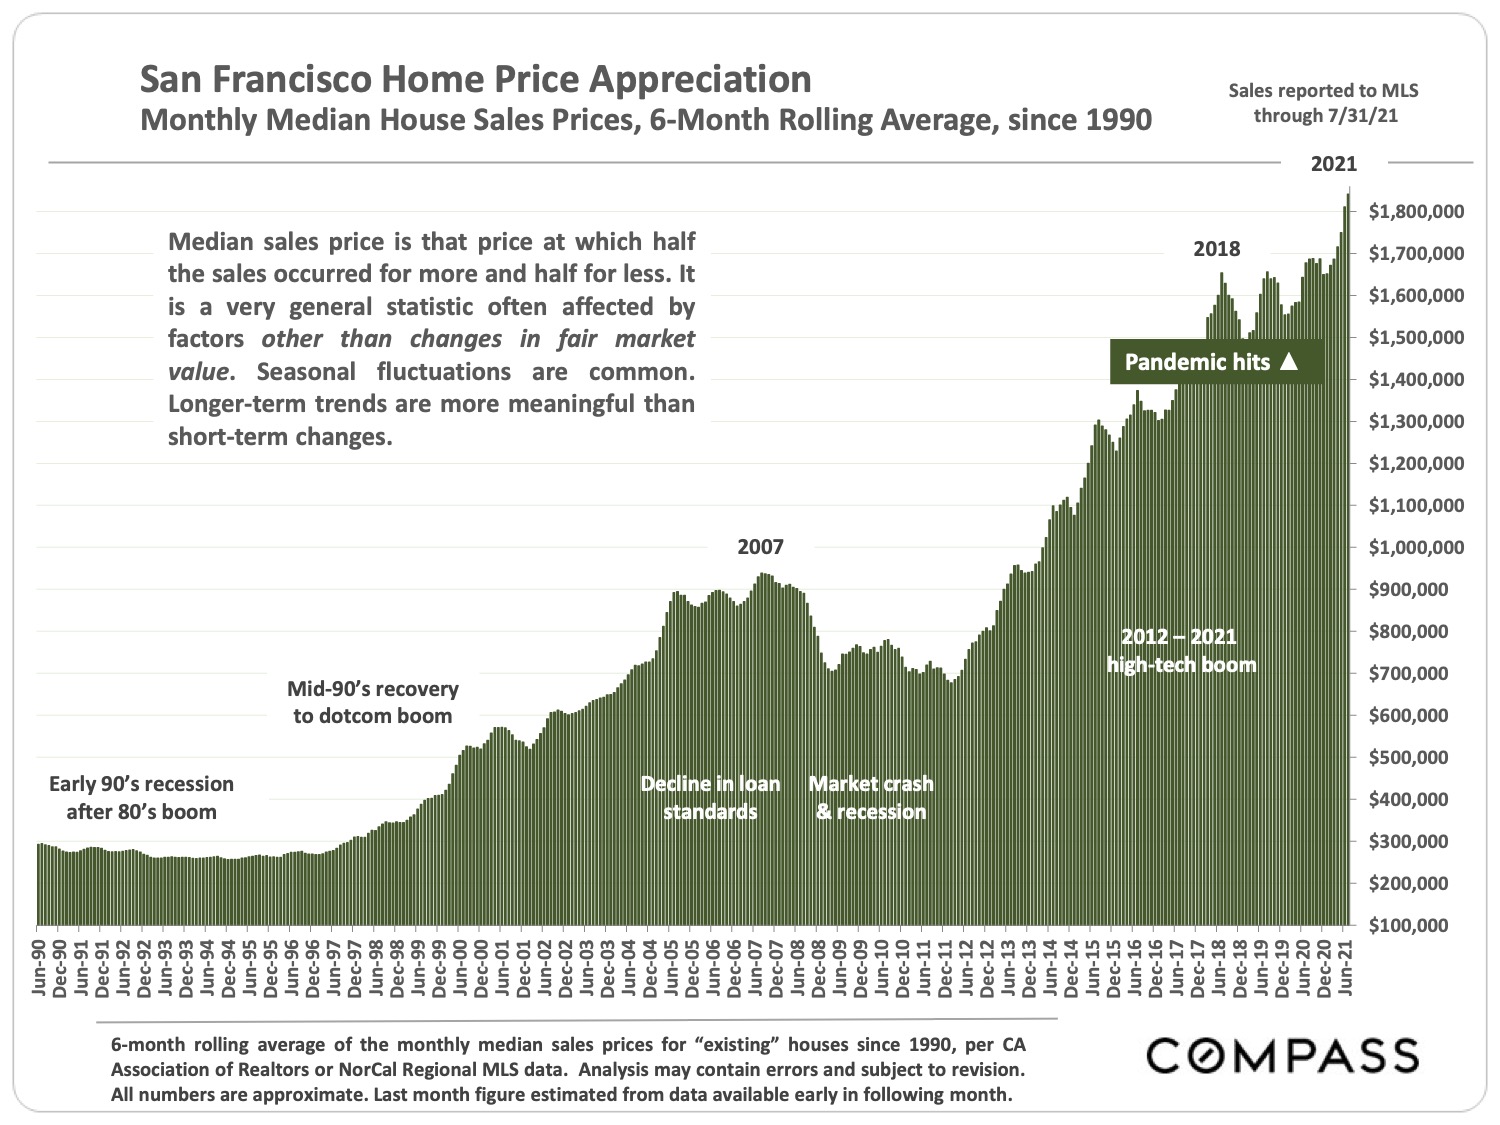 Image of San Francisco Home Price Appreciation Monthly Median House Sales Prices 6 Month Rolling Average since 1990